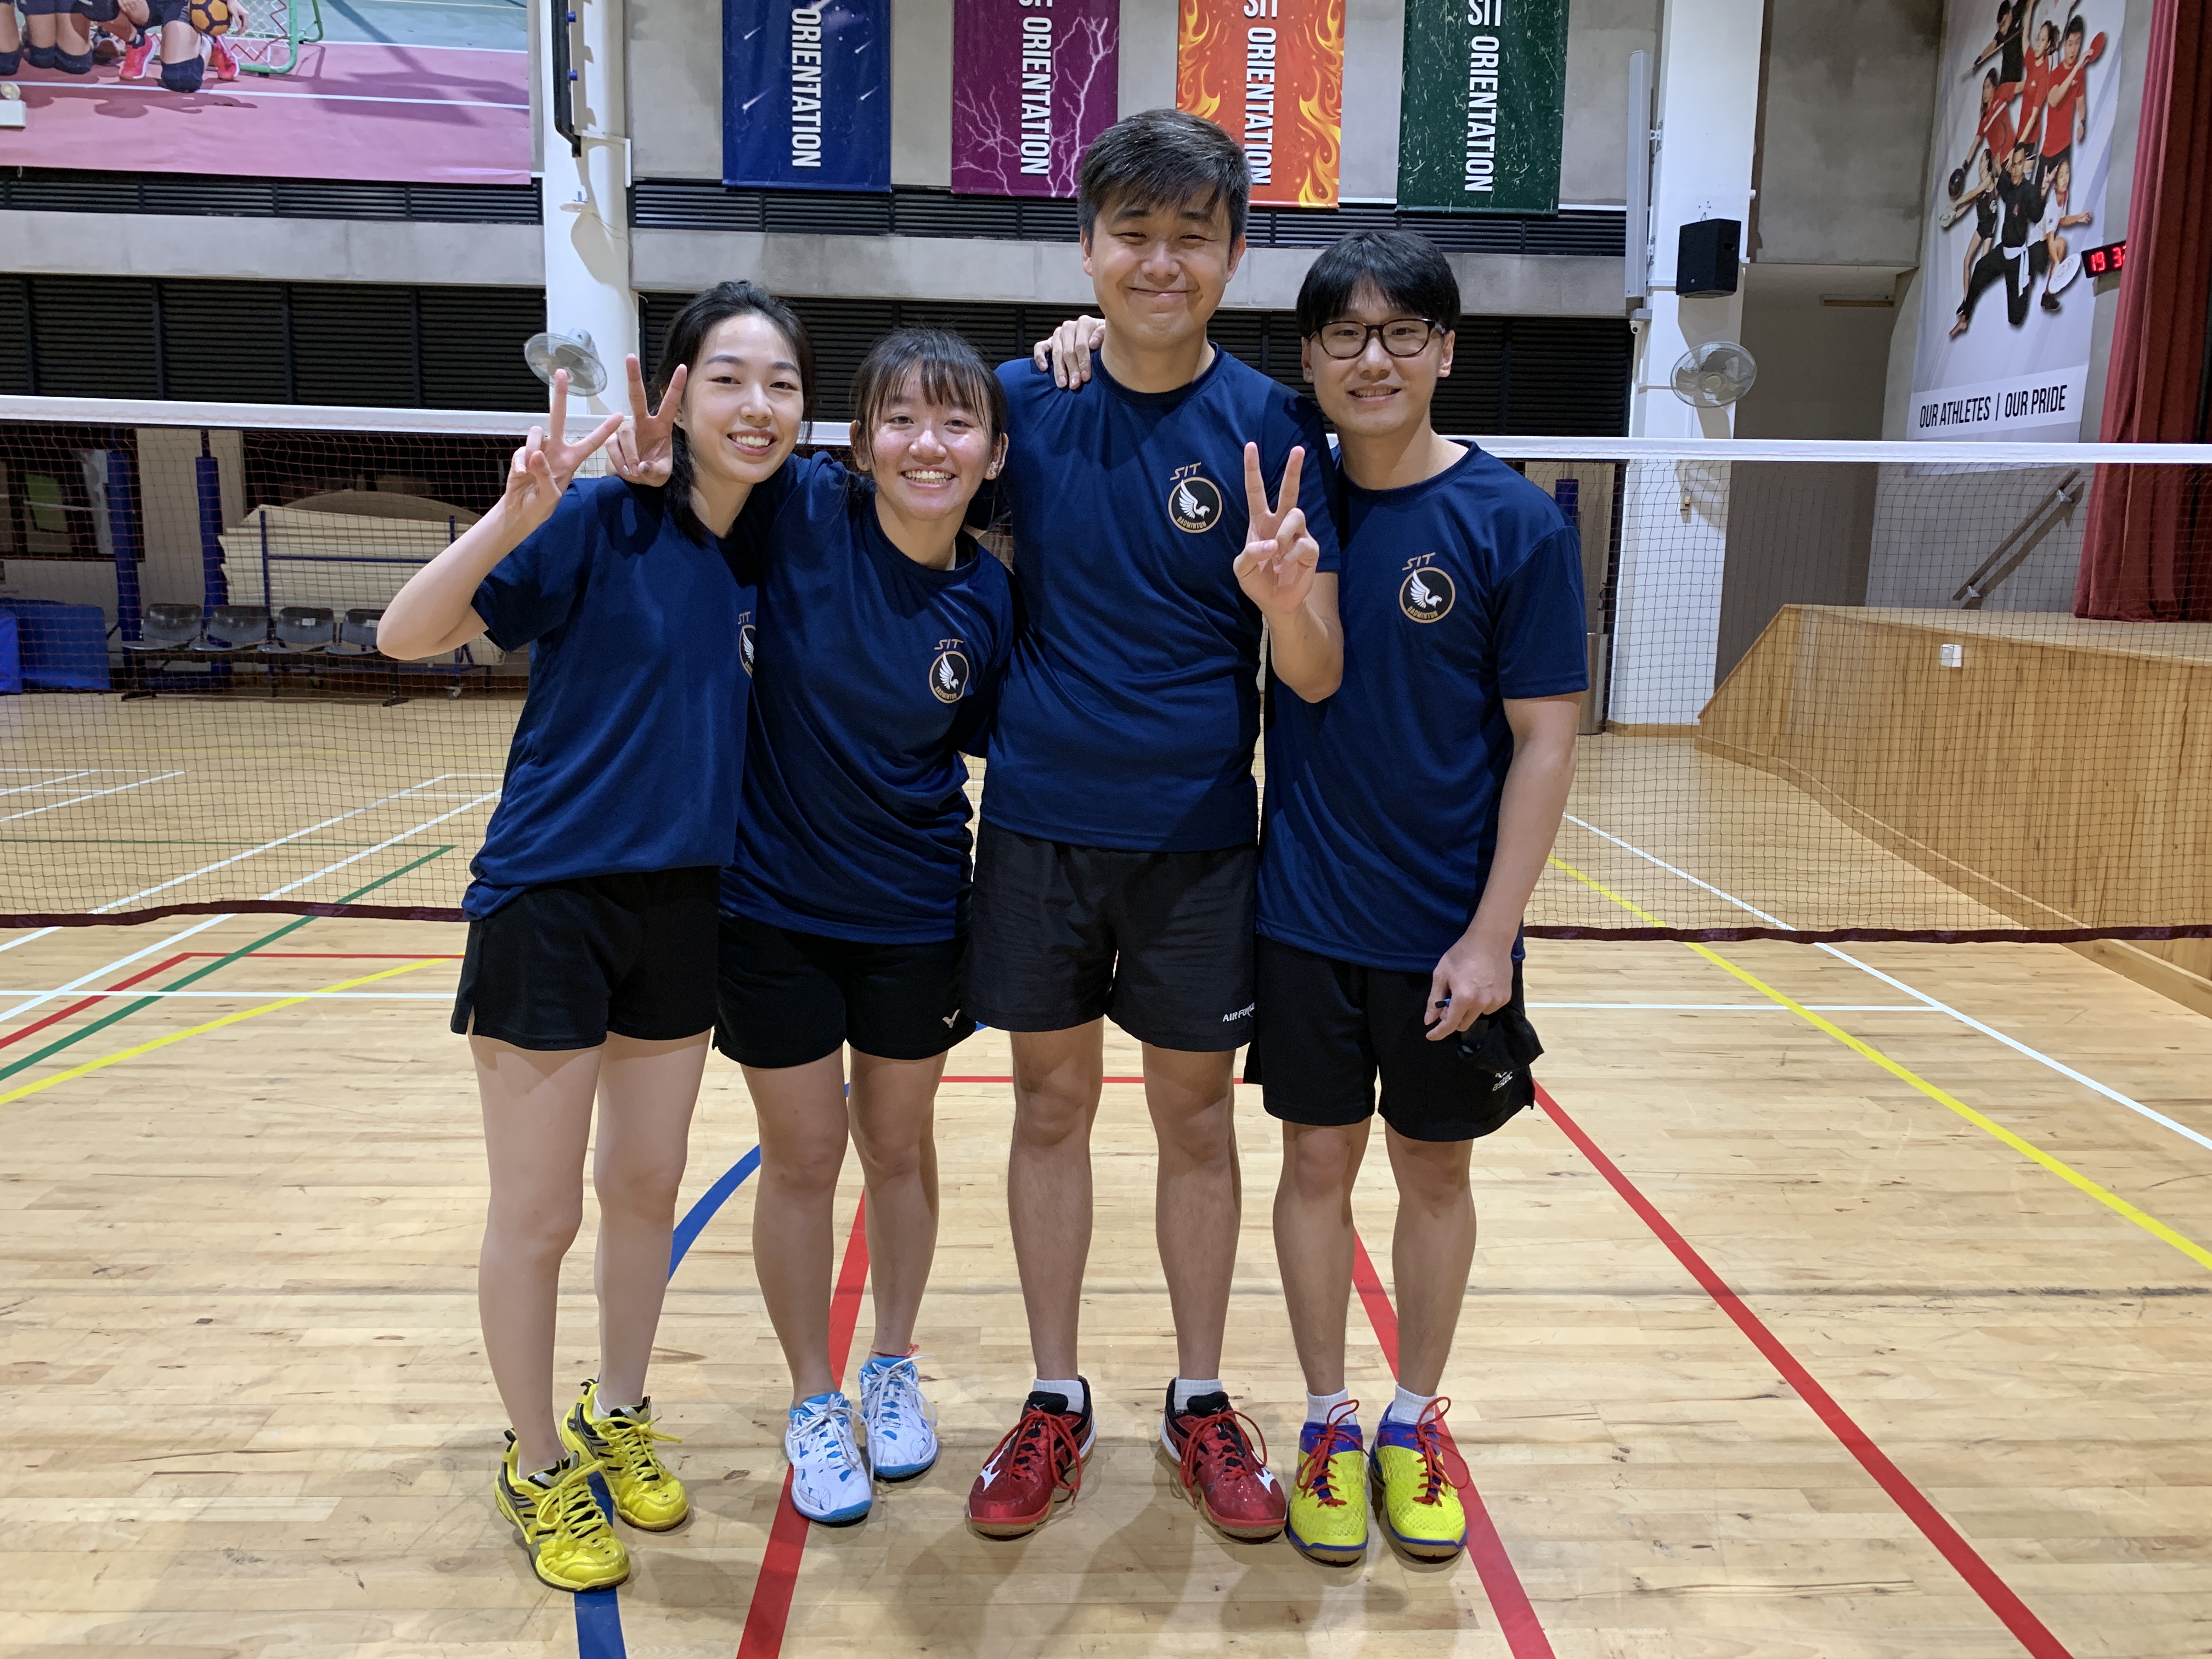 Marianne second from left Badminton player